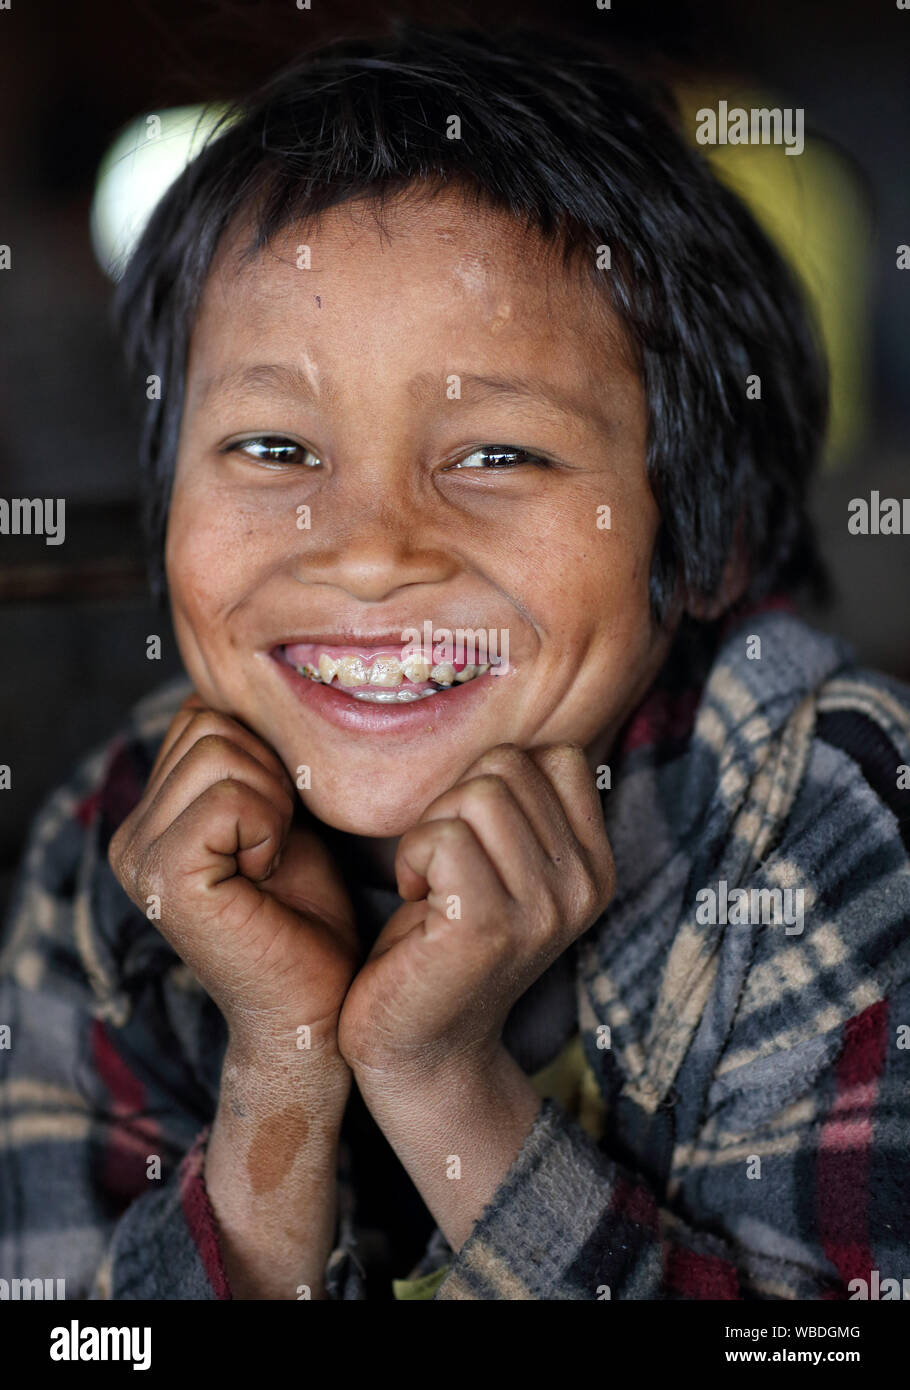 Palaung boy in a village near Hsipaw, Myanmar Stock Photo